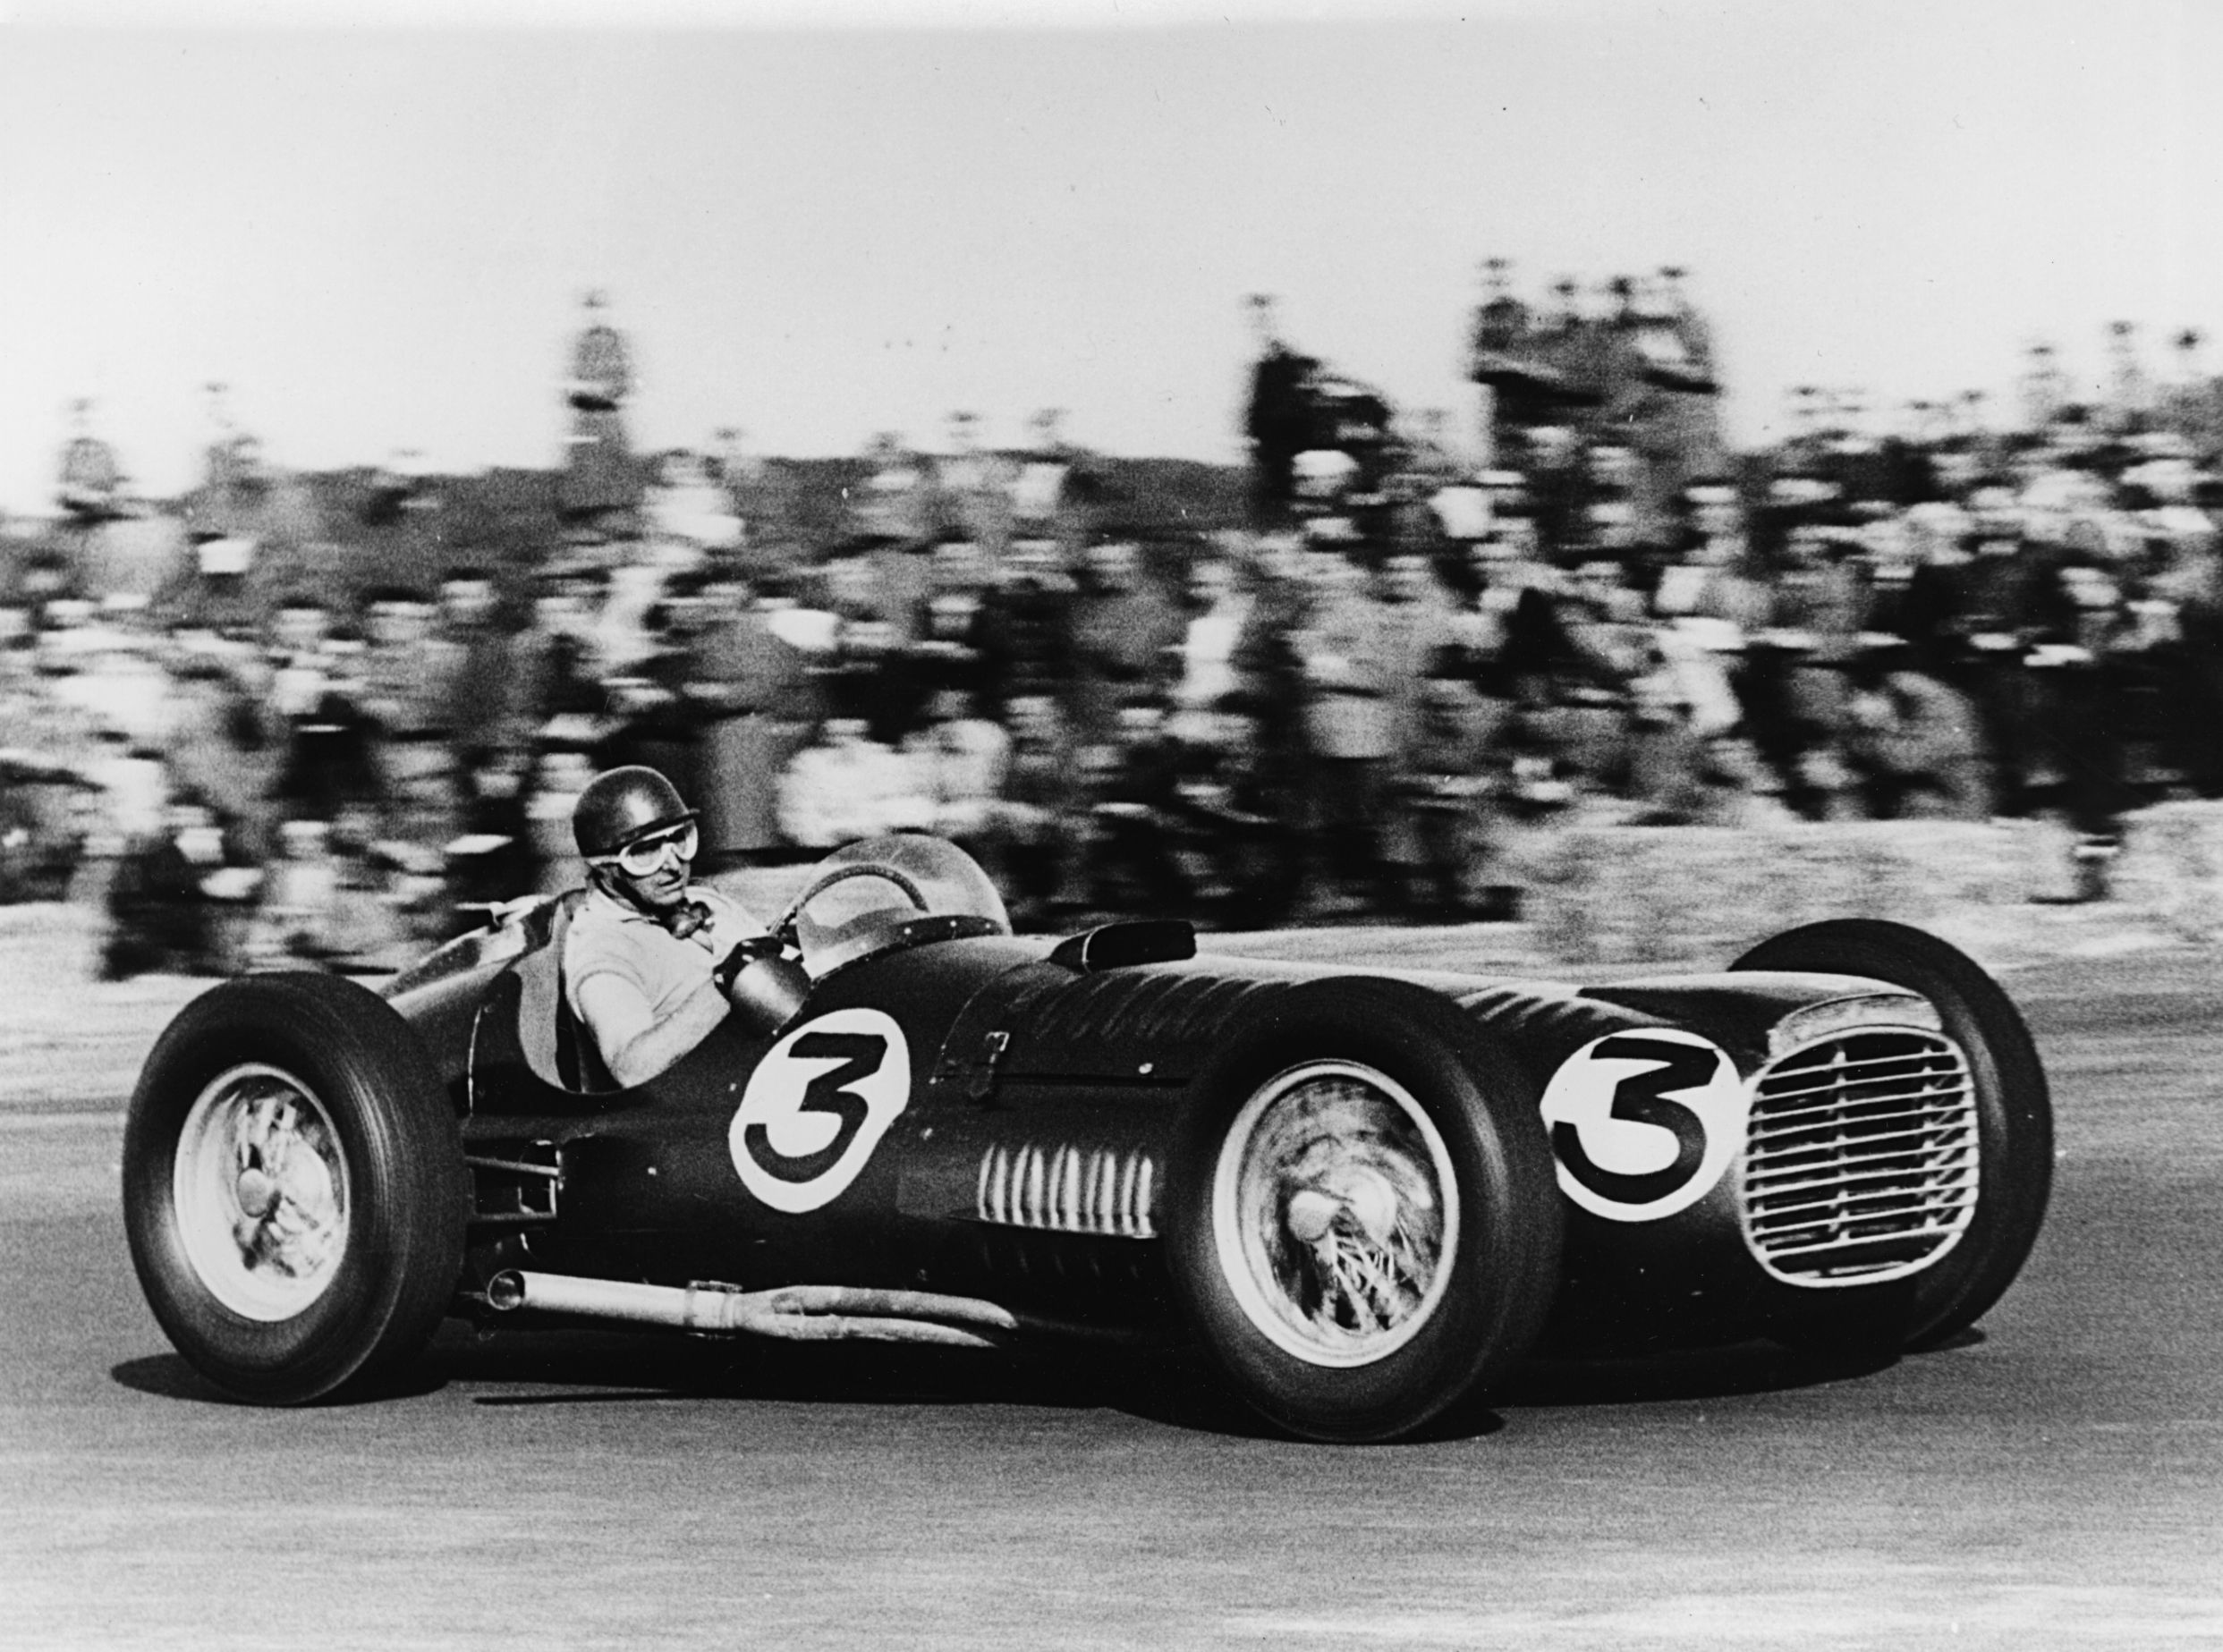 BRM V16 (National Motor Museum car) at Silverstone 1953